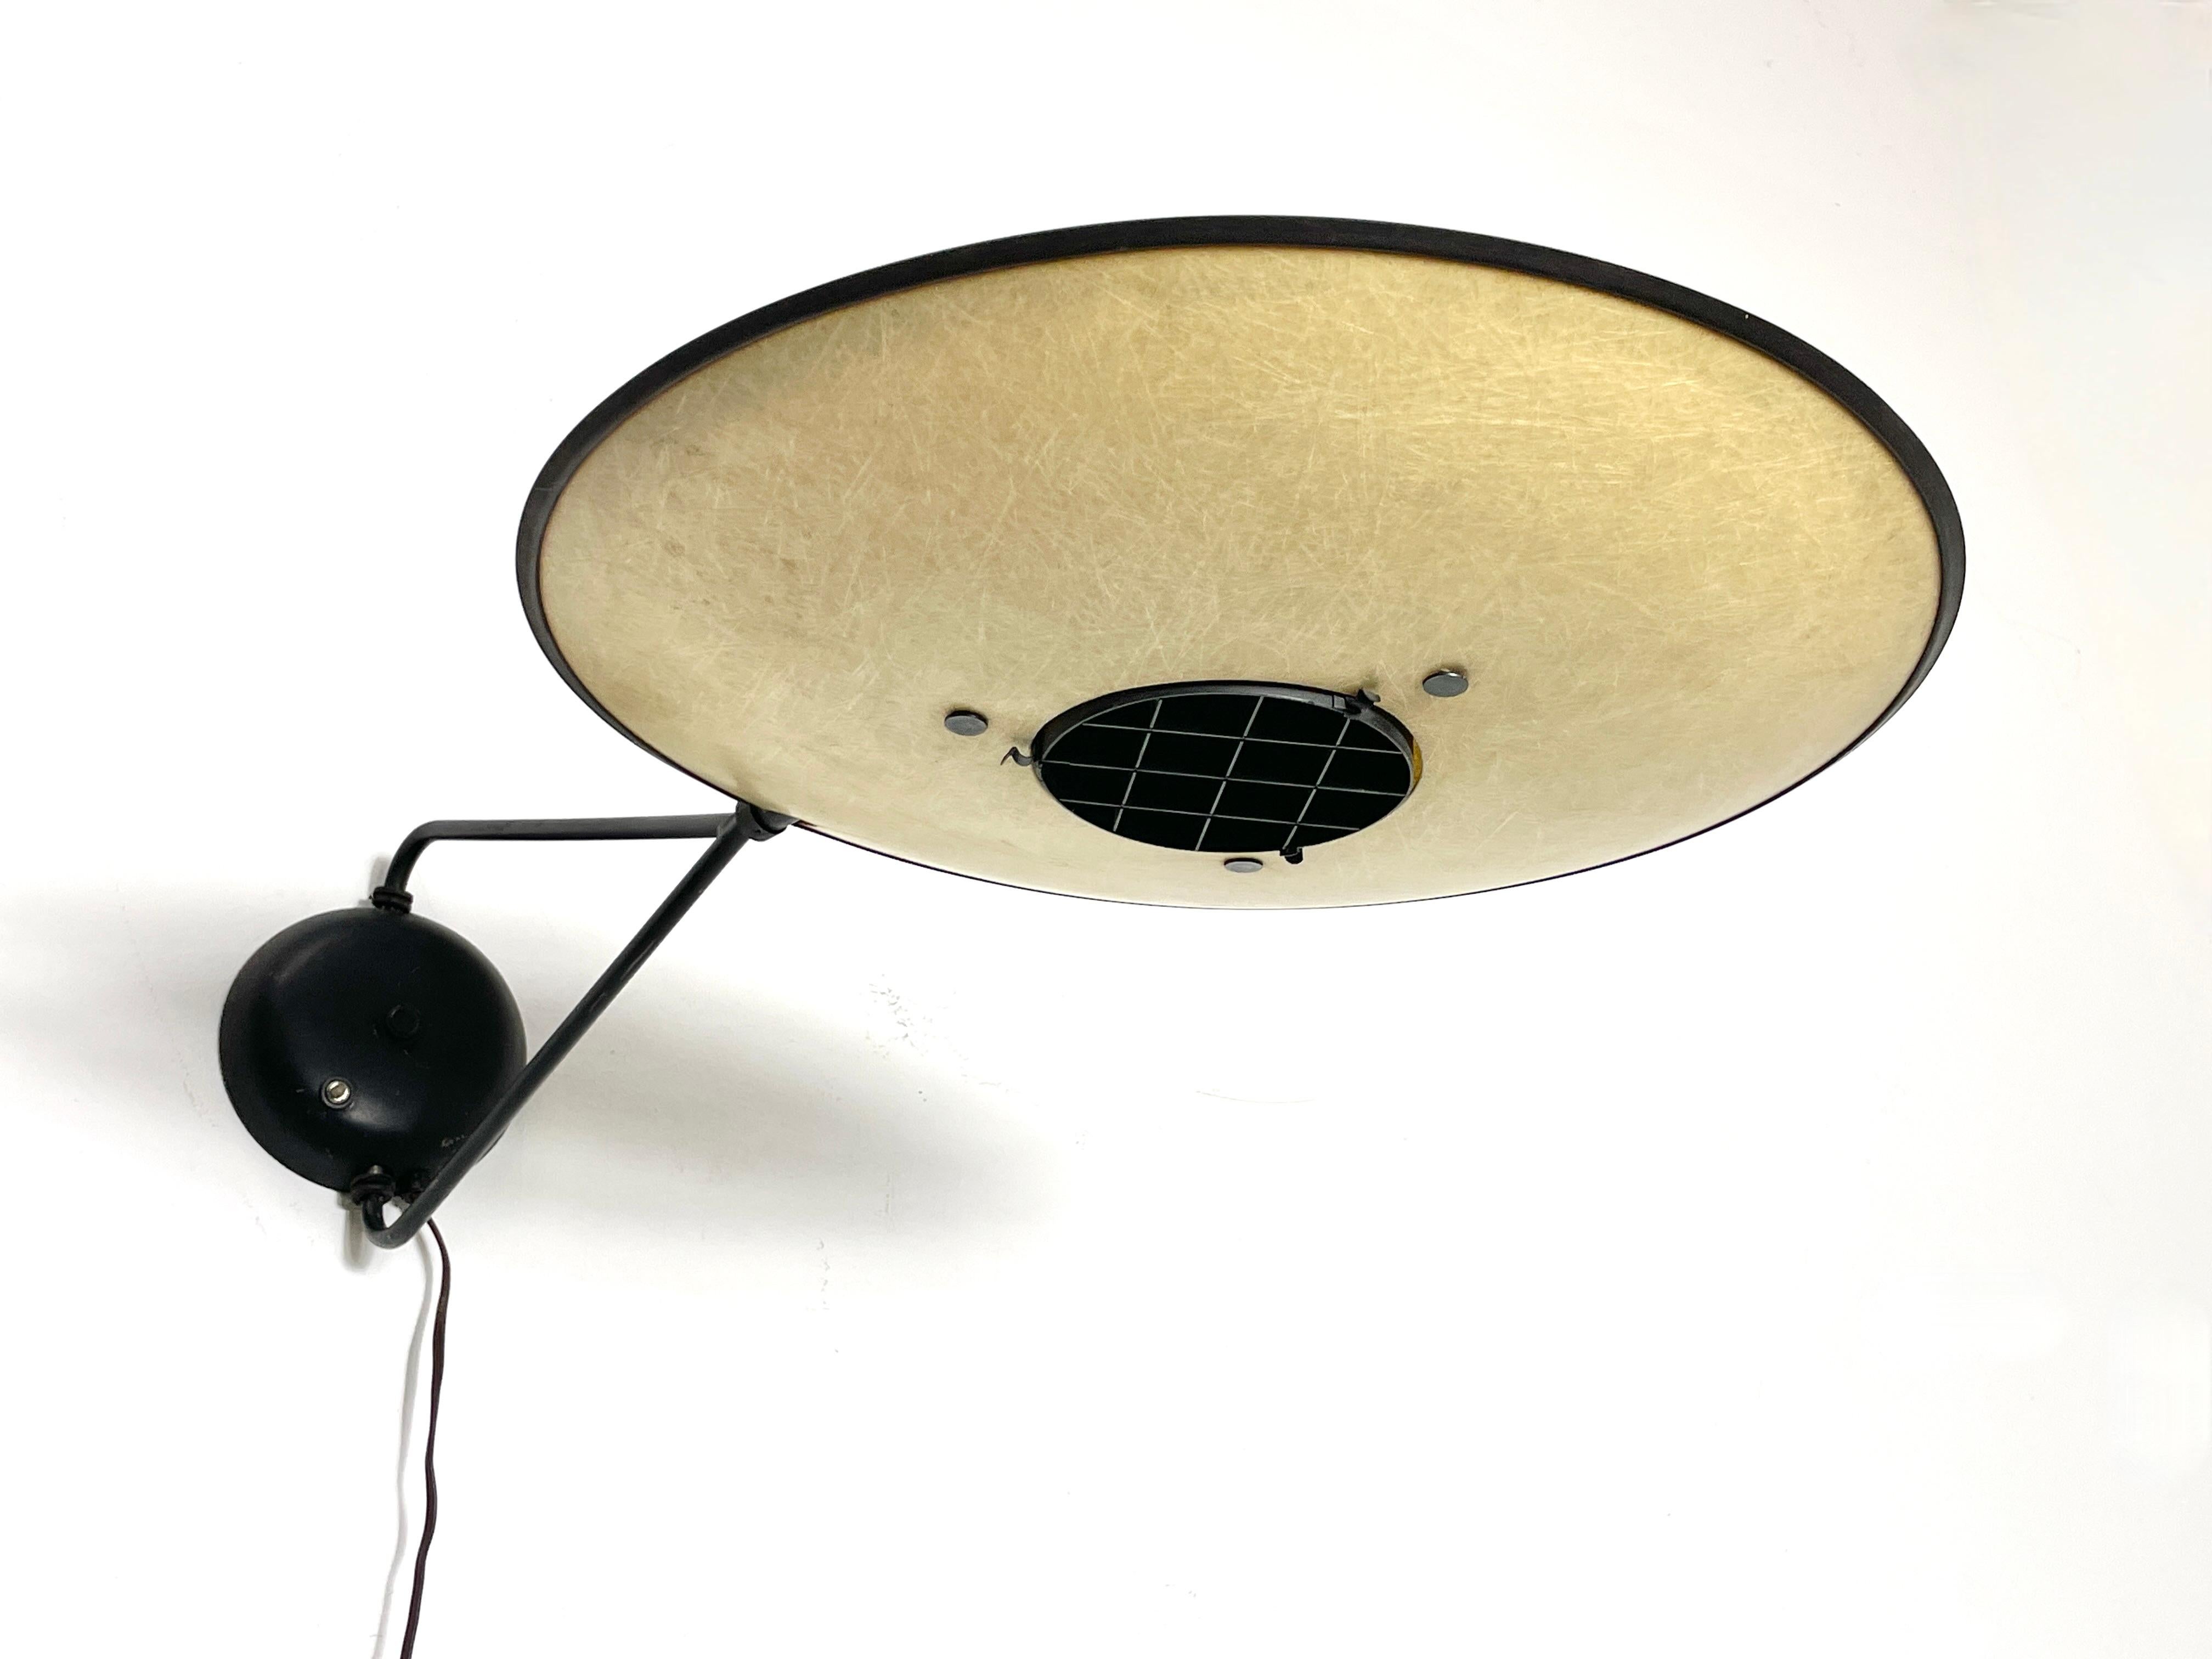 A rare wall mount Controlight lamp by Mitchell Bobrick circa late 1940s to early 1950s
Fiberglass saucer shade with black metal grid diffuser
Shade pivots on a triangular swing arm in black enameled steel
All original with label intact